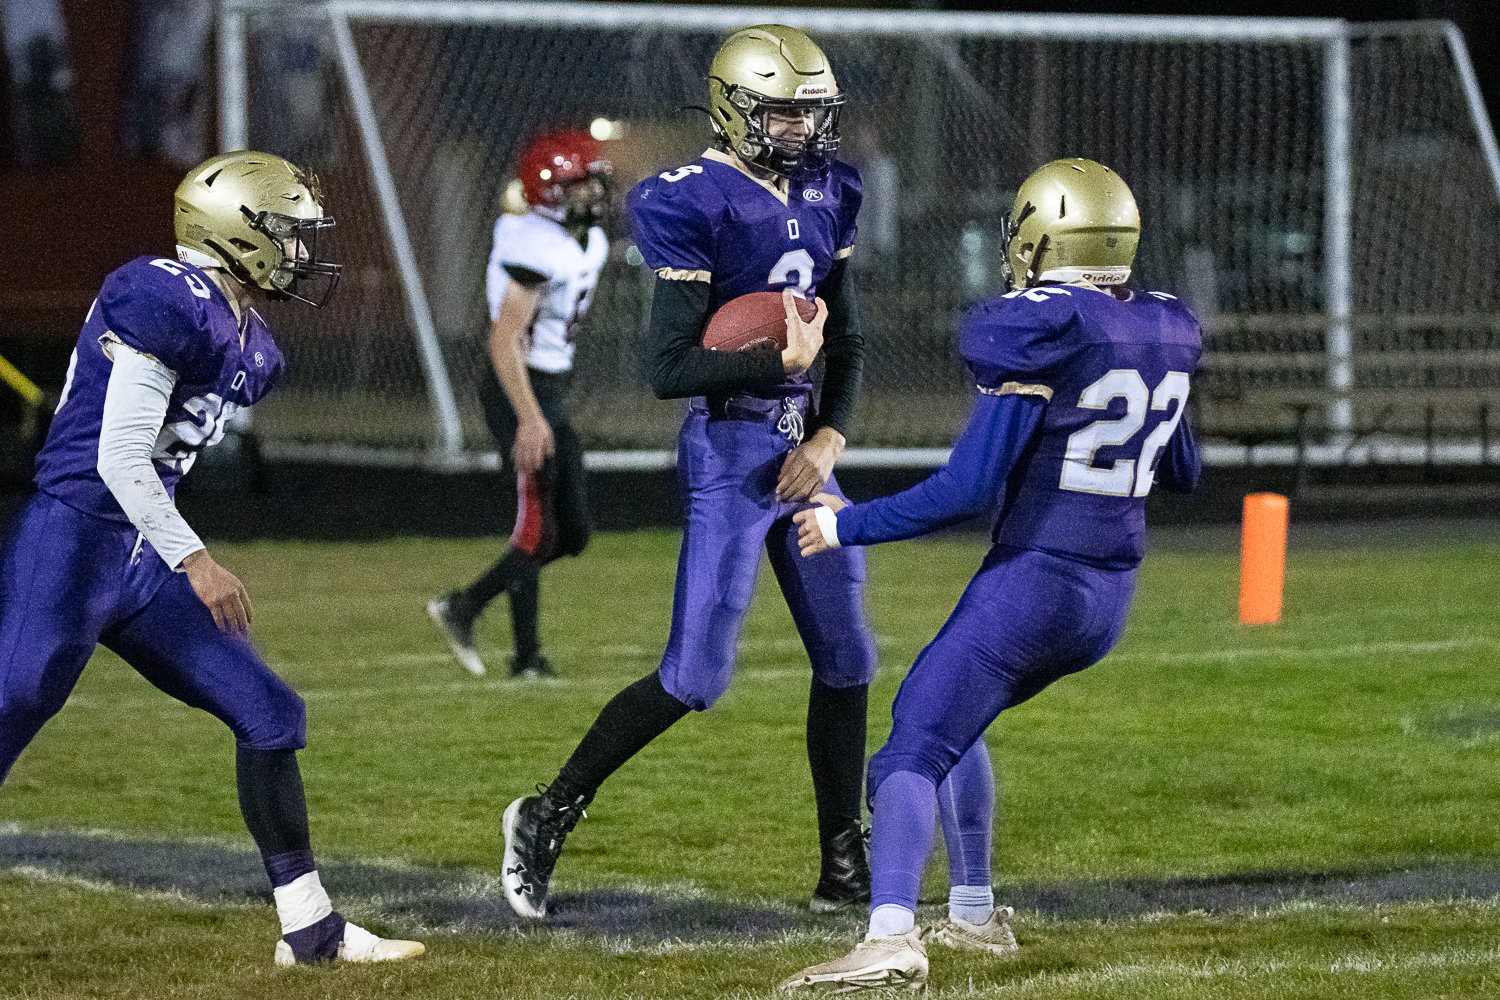 Onalaska receiver Cooper Lawrence celebrates after a touchdown catch against Wahkiakum Oct. 27.